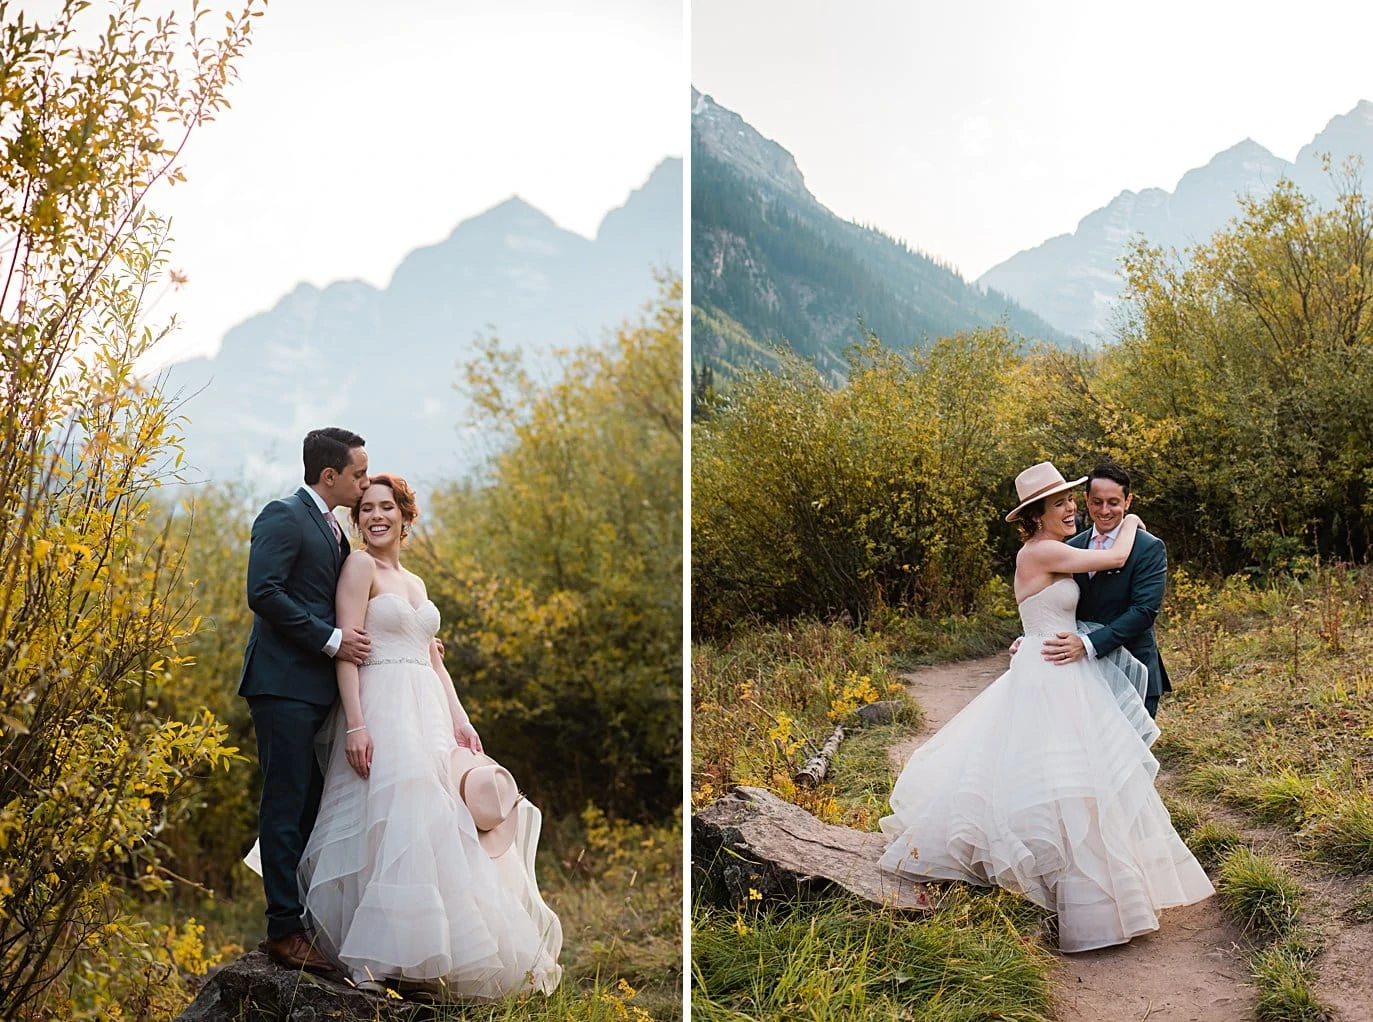 bride and groom cuddle in front of Maroon Bells peaks at fall Maroon Bells wedding by Snowmass wedding photographer Jennie Crate